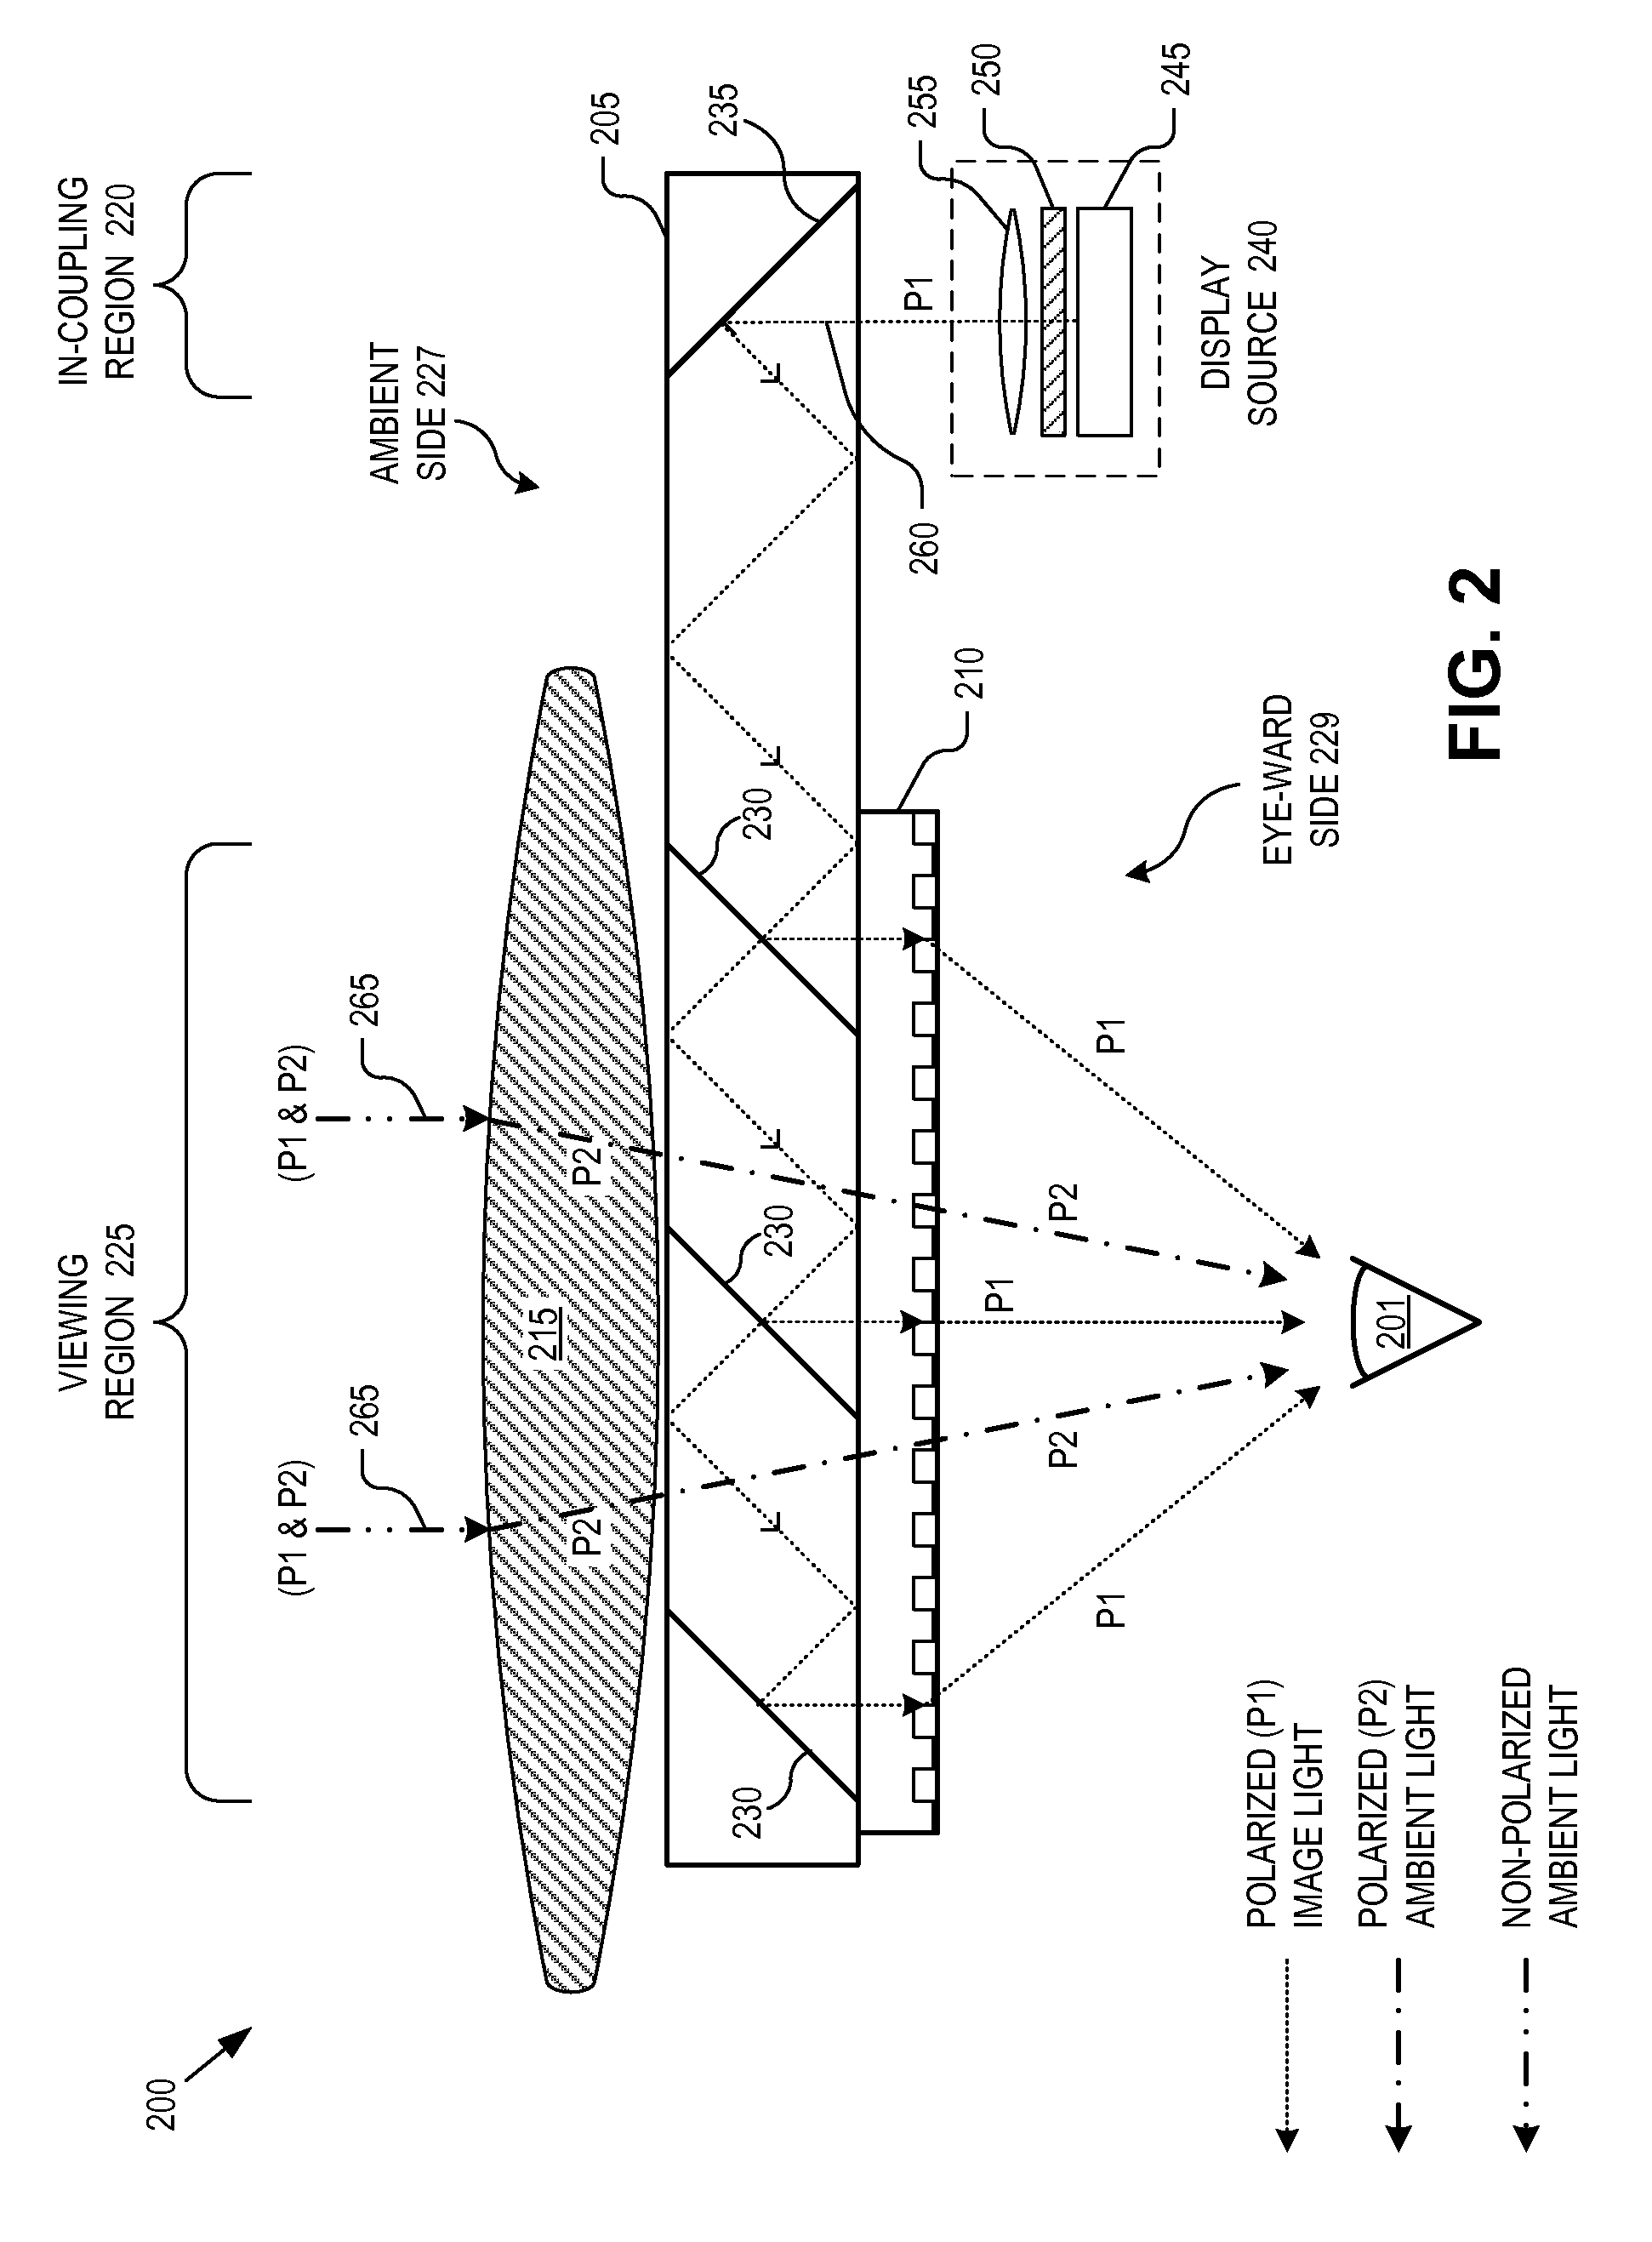 Near-to-eye display with diffractive lens